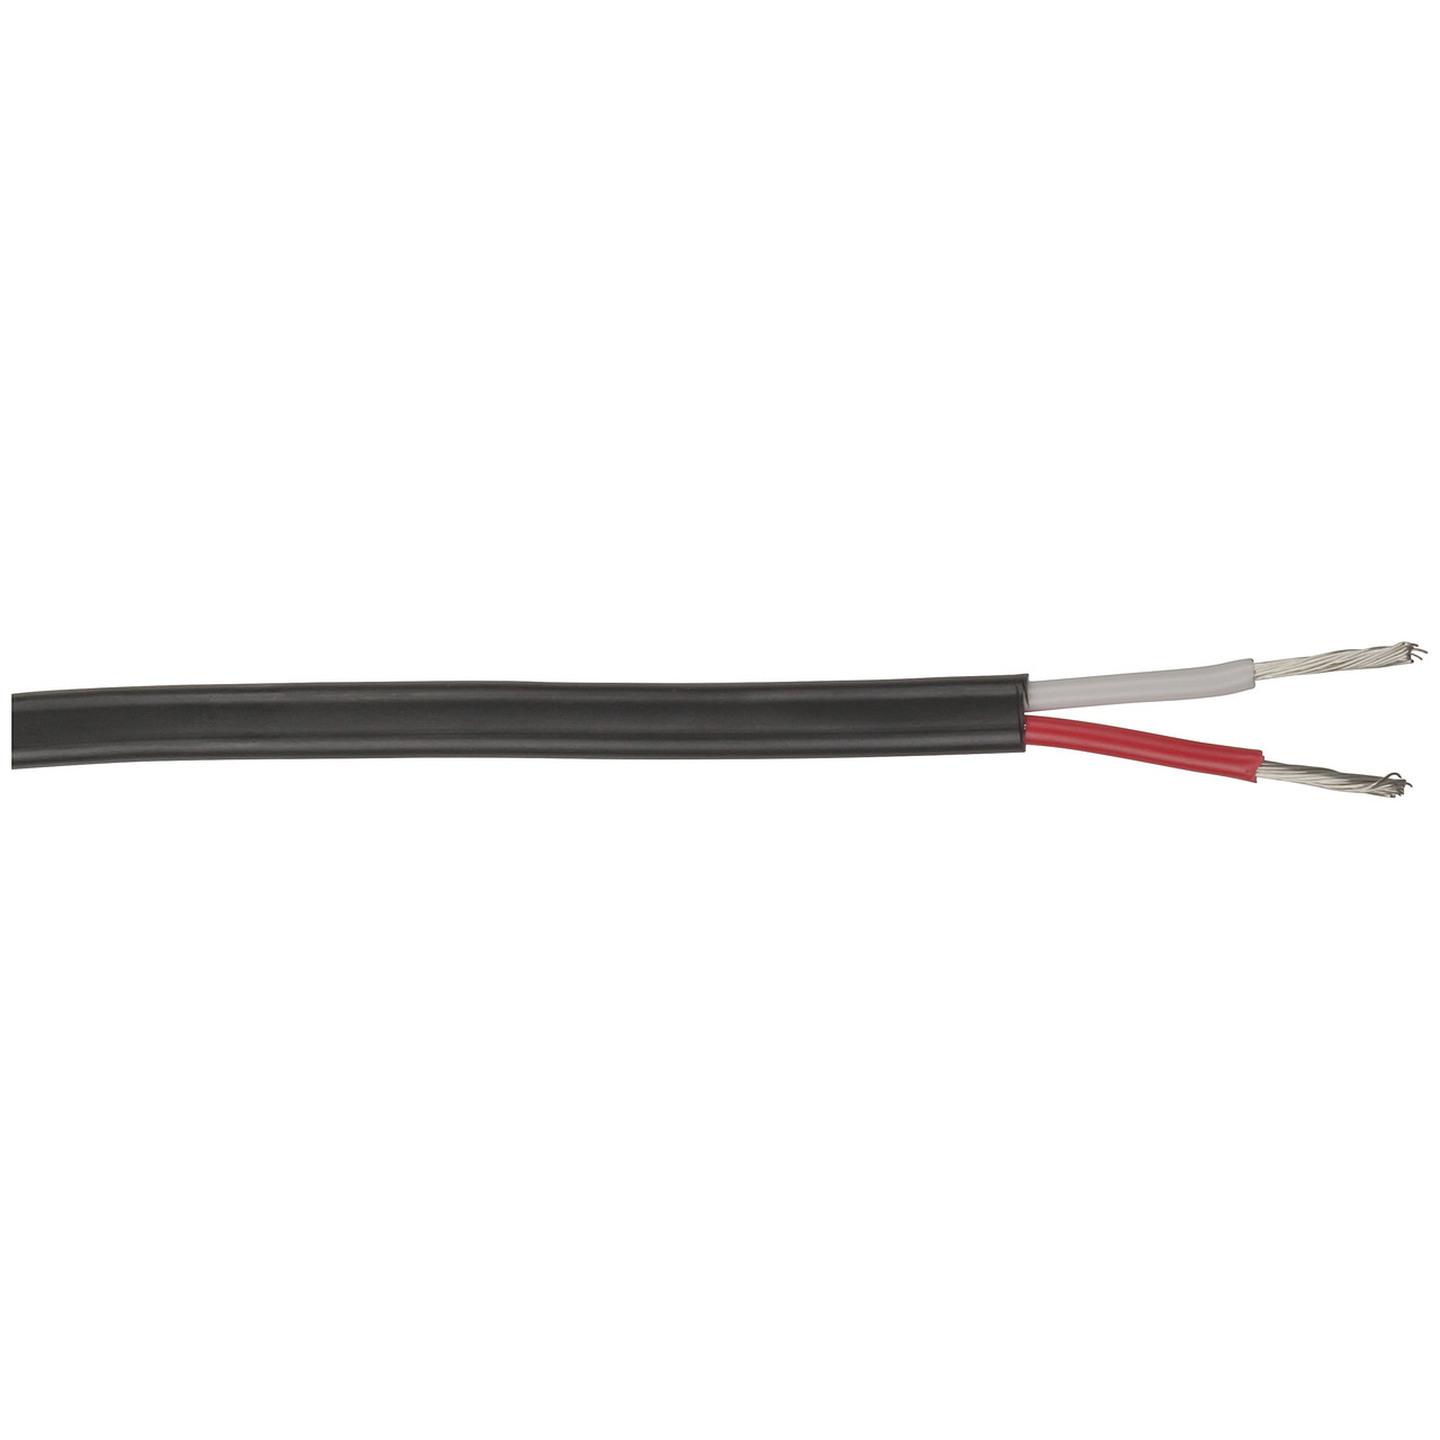 7.5 Amp 2 Core Tinned DC Power Cable